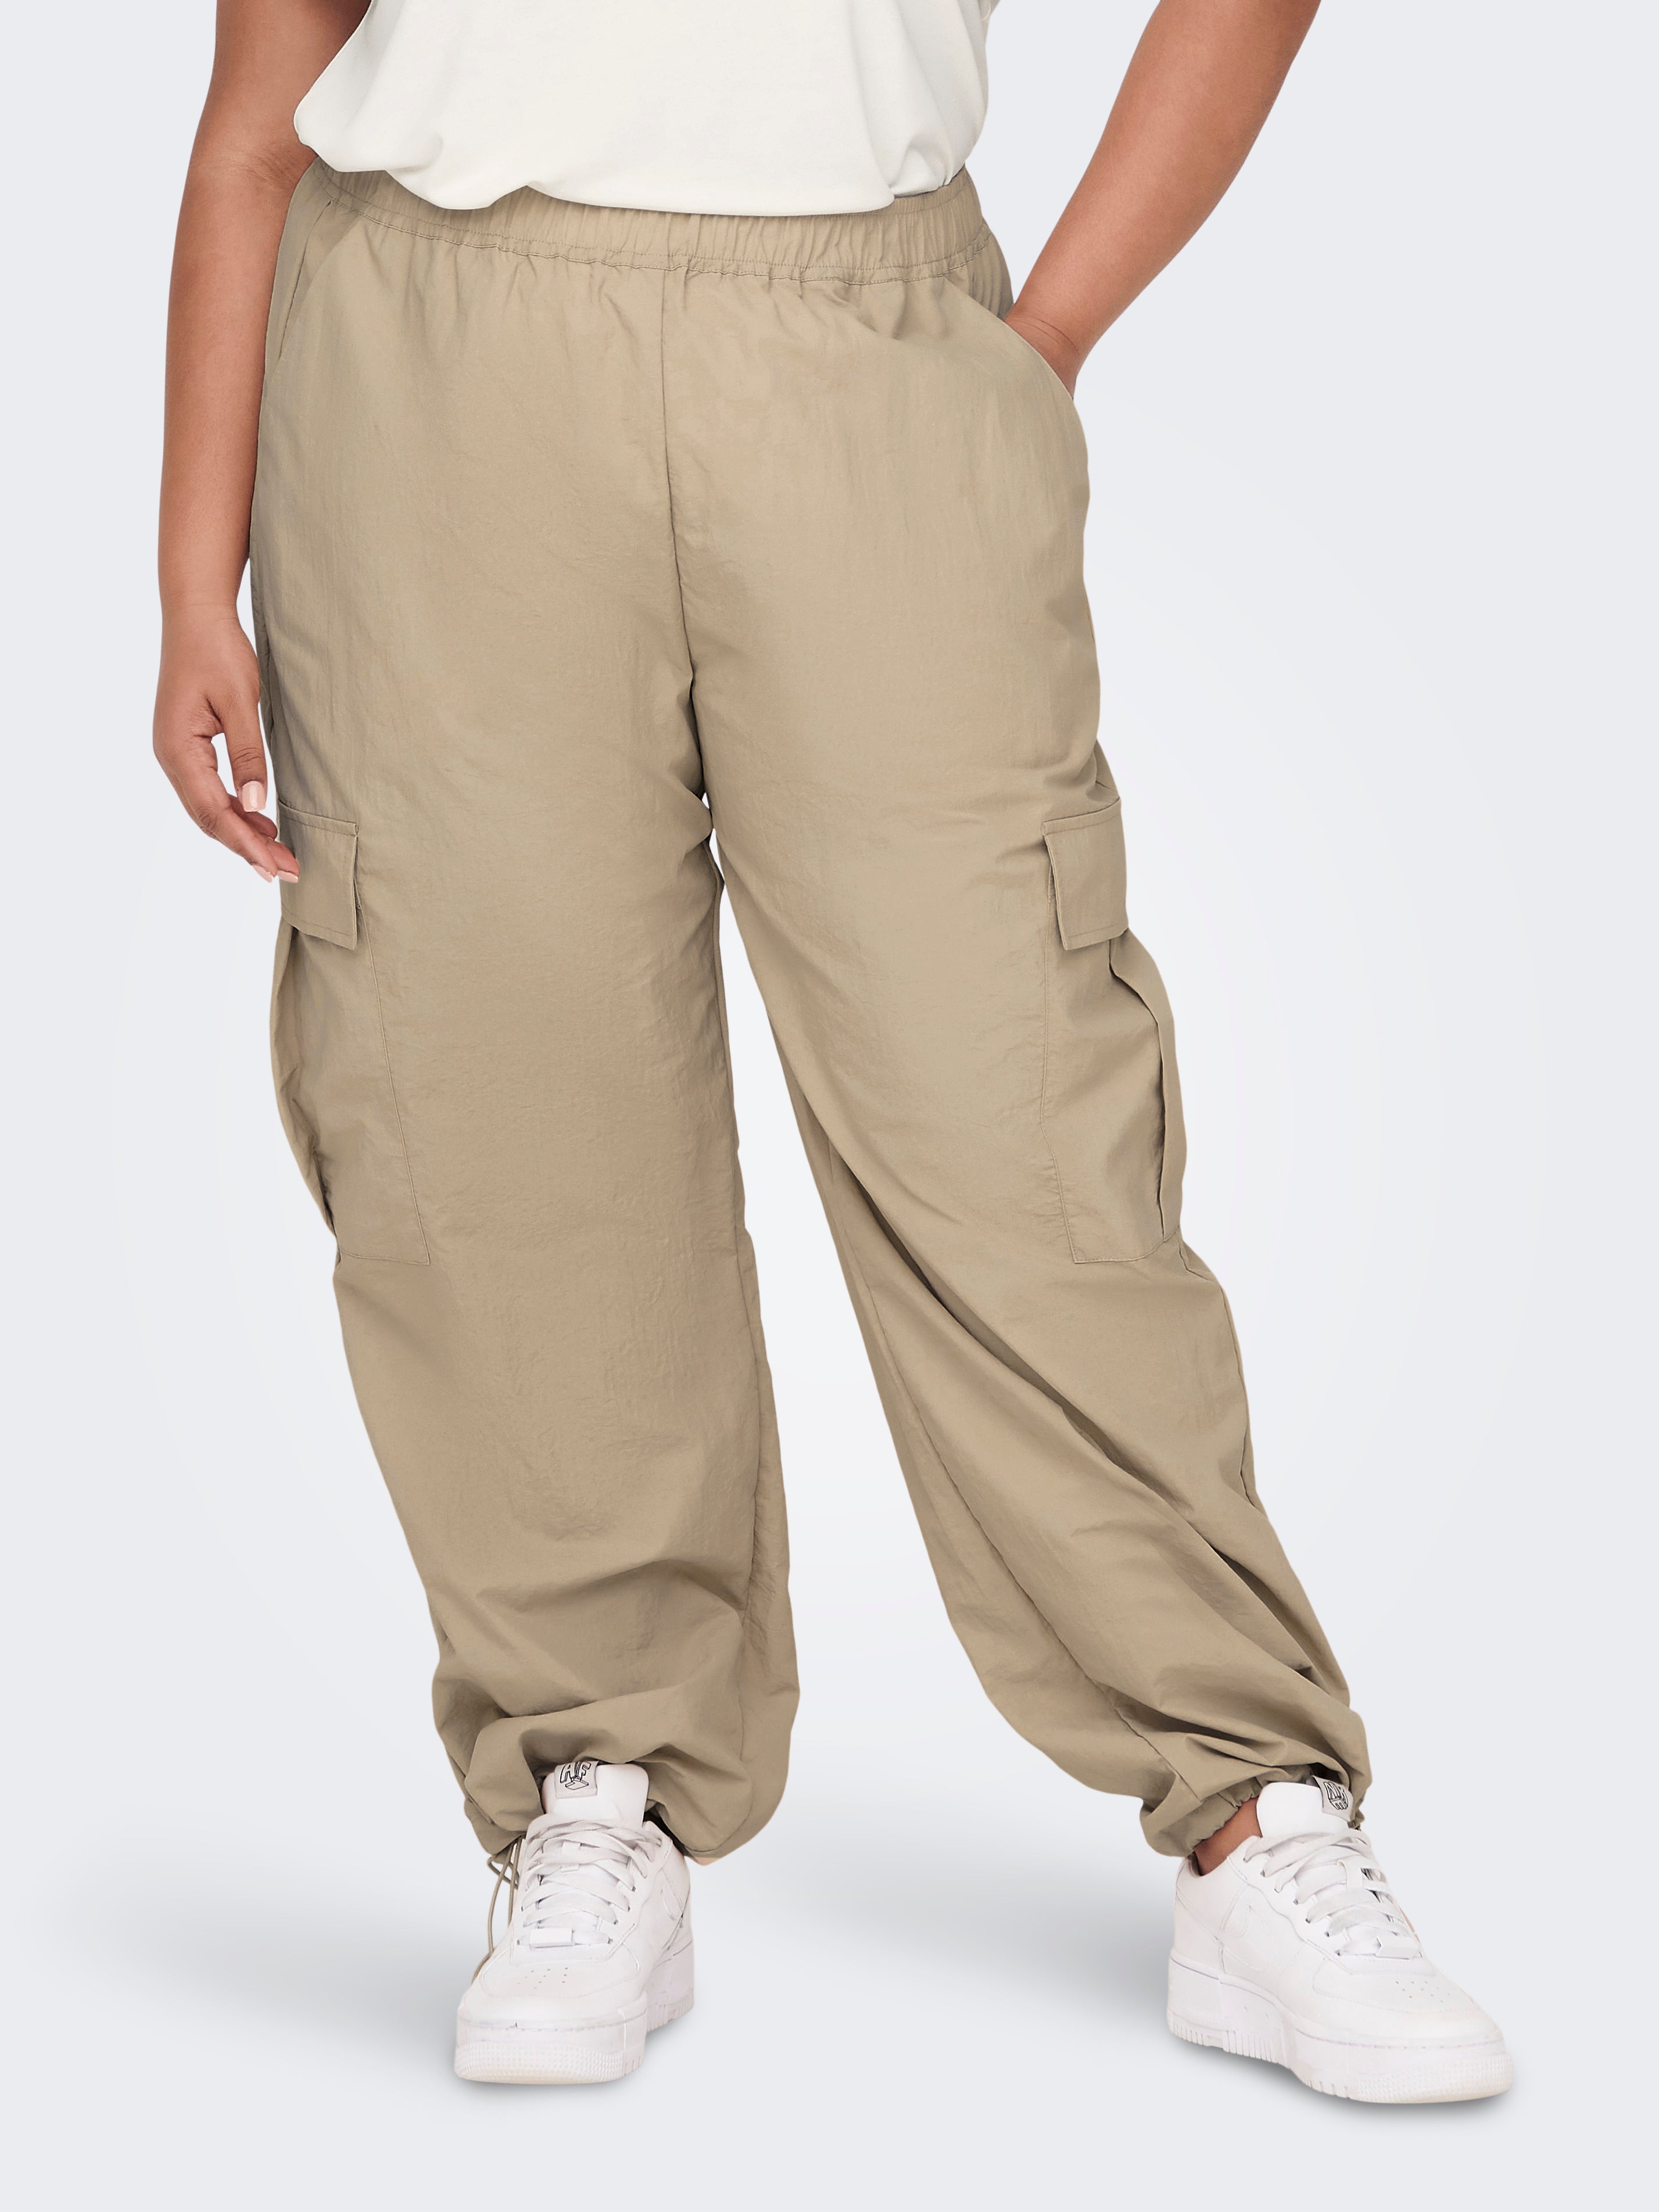 Human Made Cargo Pant Olive Drab | END.